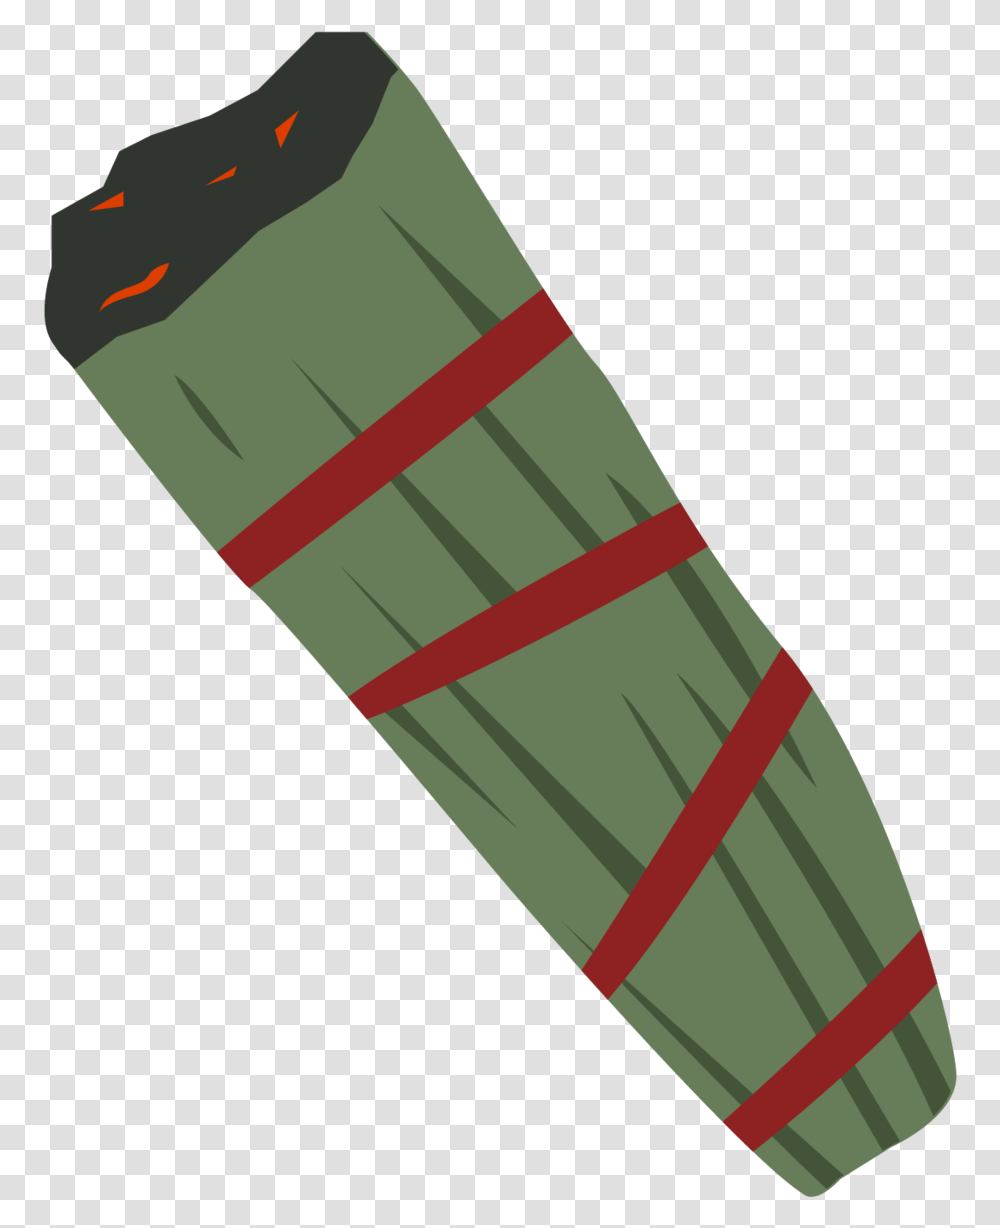 Smudge Skateboarding, Weapon, Weaponry, Bomb, Dynamite Transparent Png